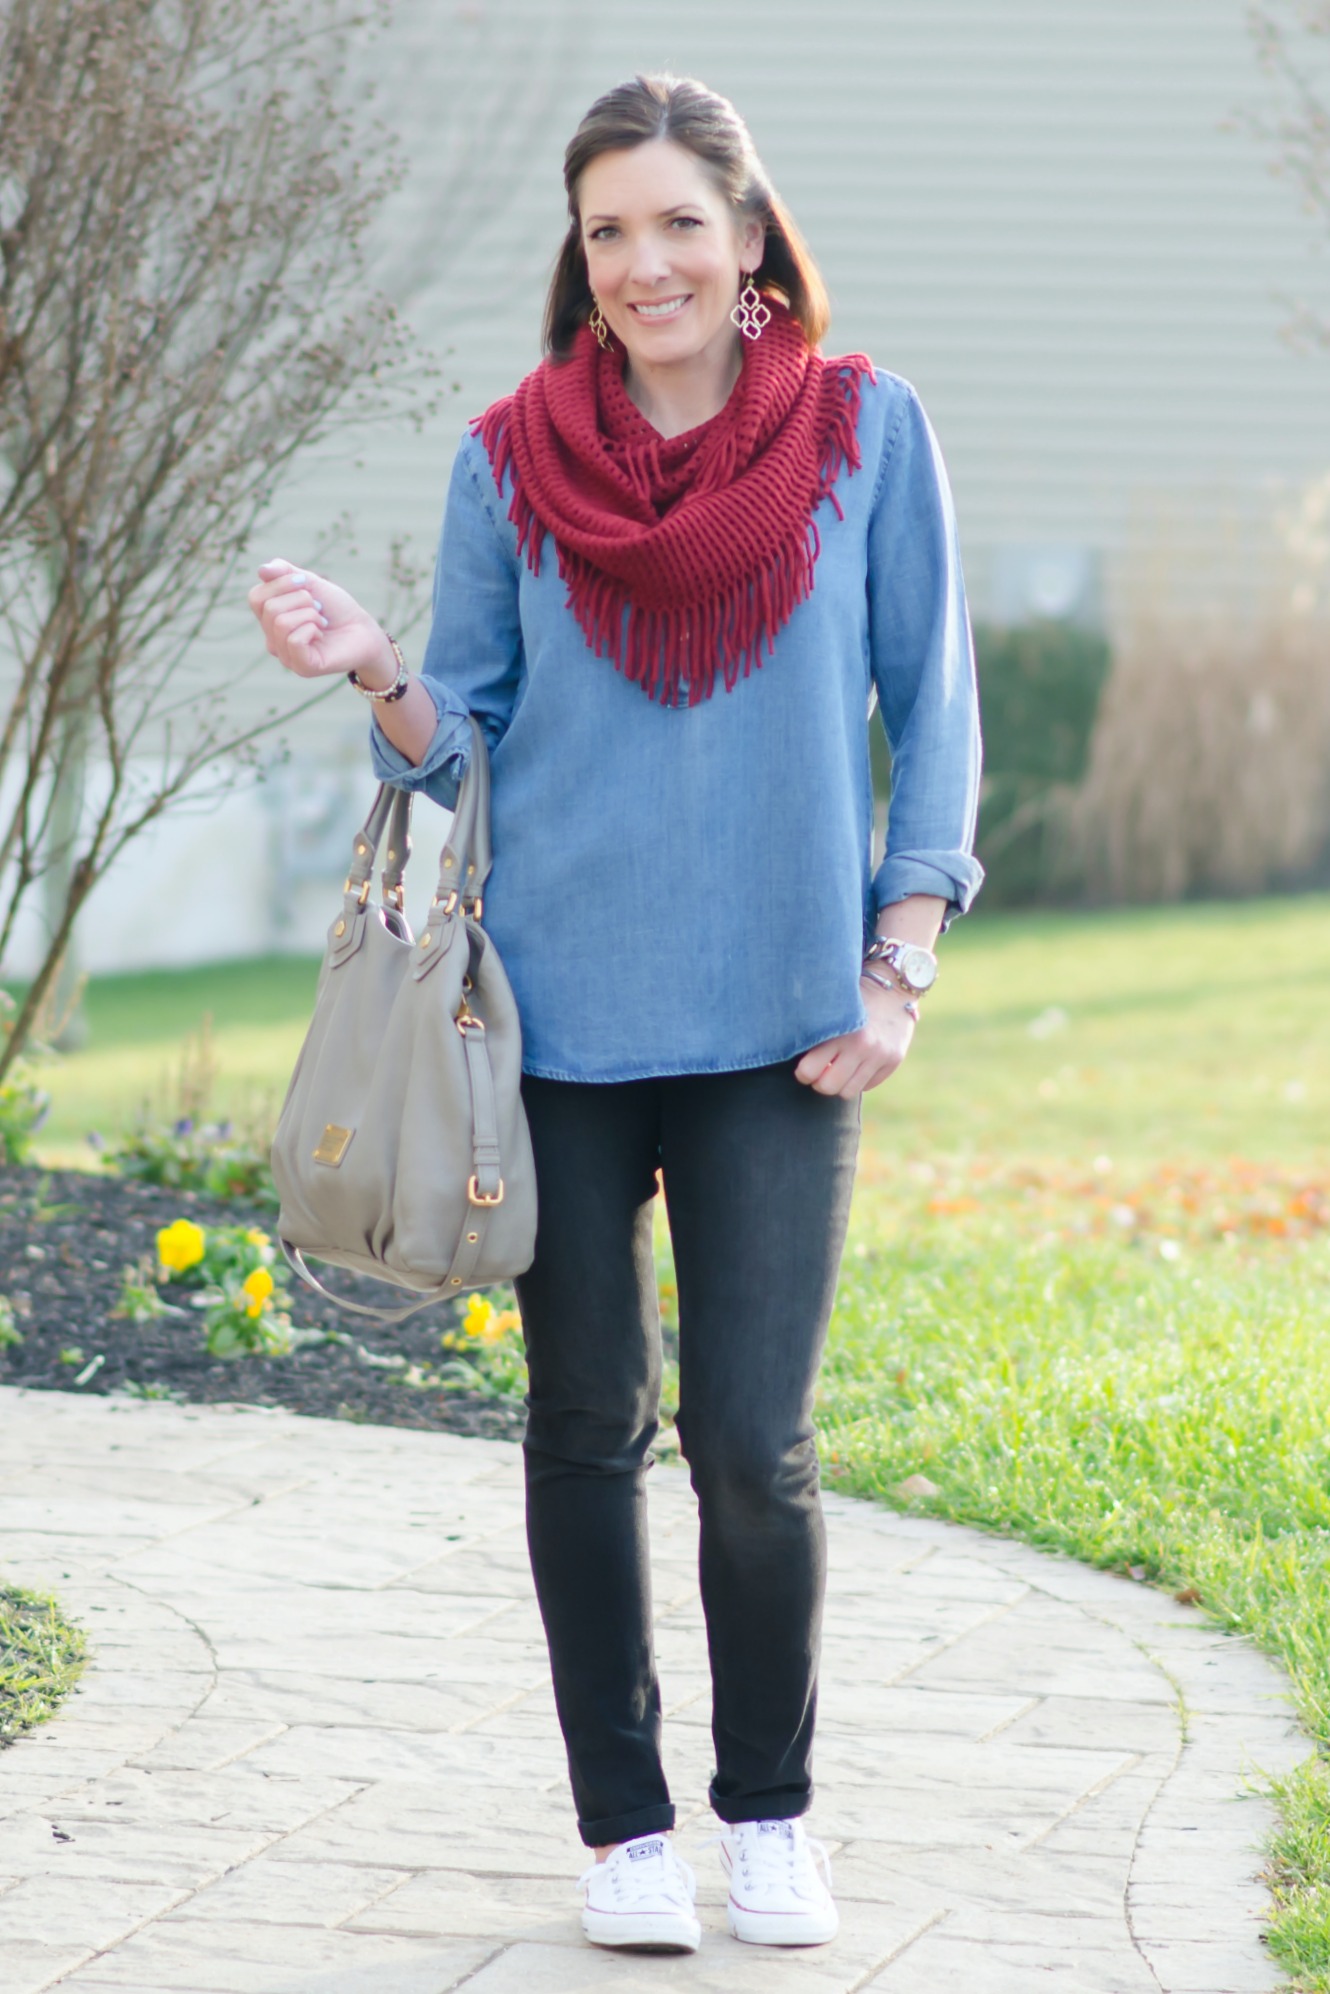 Chambray Tunic with Black Jeans, Red Fringe Scarf, and Converse